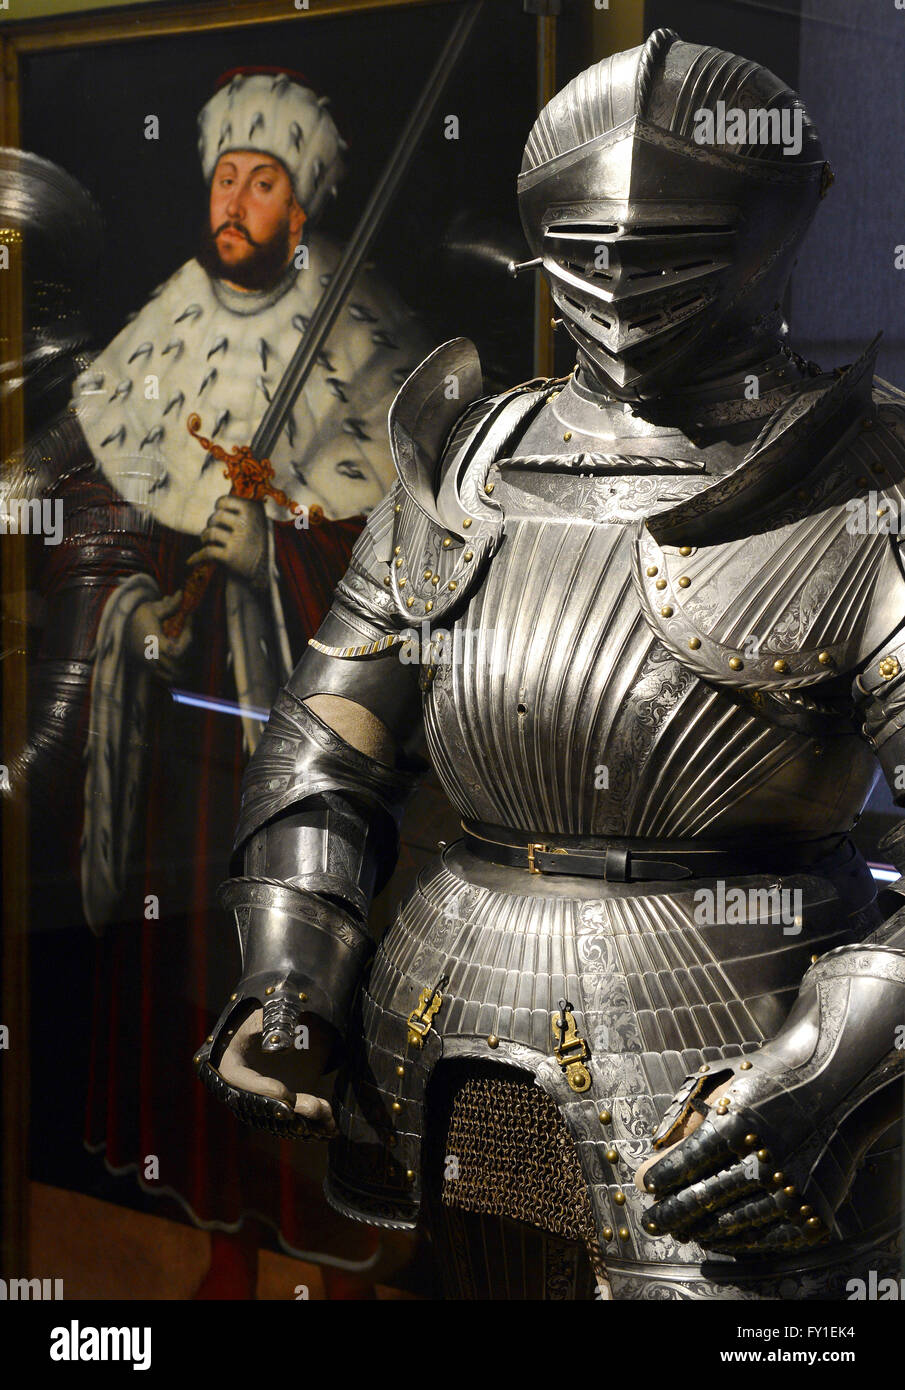 Knight's armour (R) from 1530 is on display next to a painting of John Frederick I, Elector of Saxony, created in the workshop of Lucas Cranach the Elder around 1540/45, in the Thuringian state exhibition 'The Ernestines · A Dynasty Shapes Europe' at the New Museum in Weimar, Germany, 20 April 2016. Unique exhibits from the Protestant Reformation in the 16th century to the end of the German Empire in 1918 will be showcased in Weimar and Gotha. The exhibition will run from 24 April to 28 August 2016. Photo: MARTIN SCHUTT/dpa Stock Photo